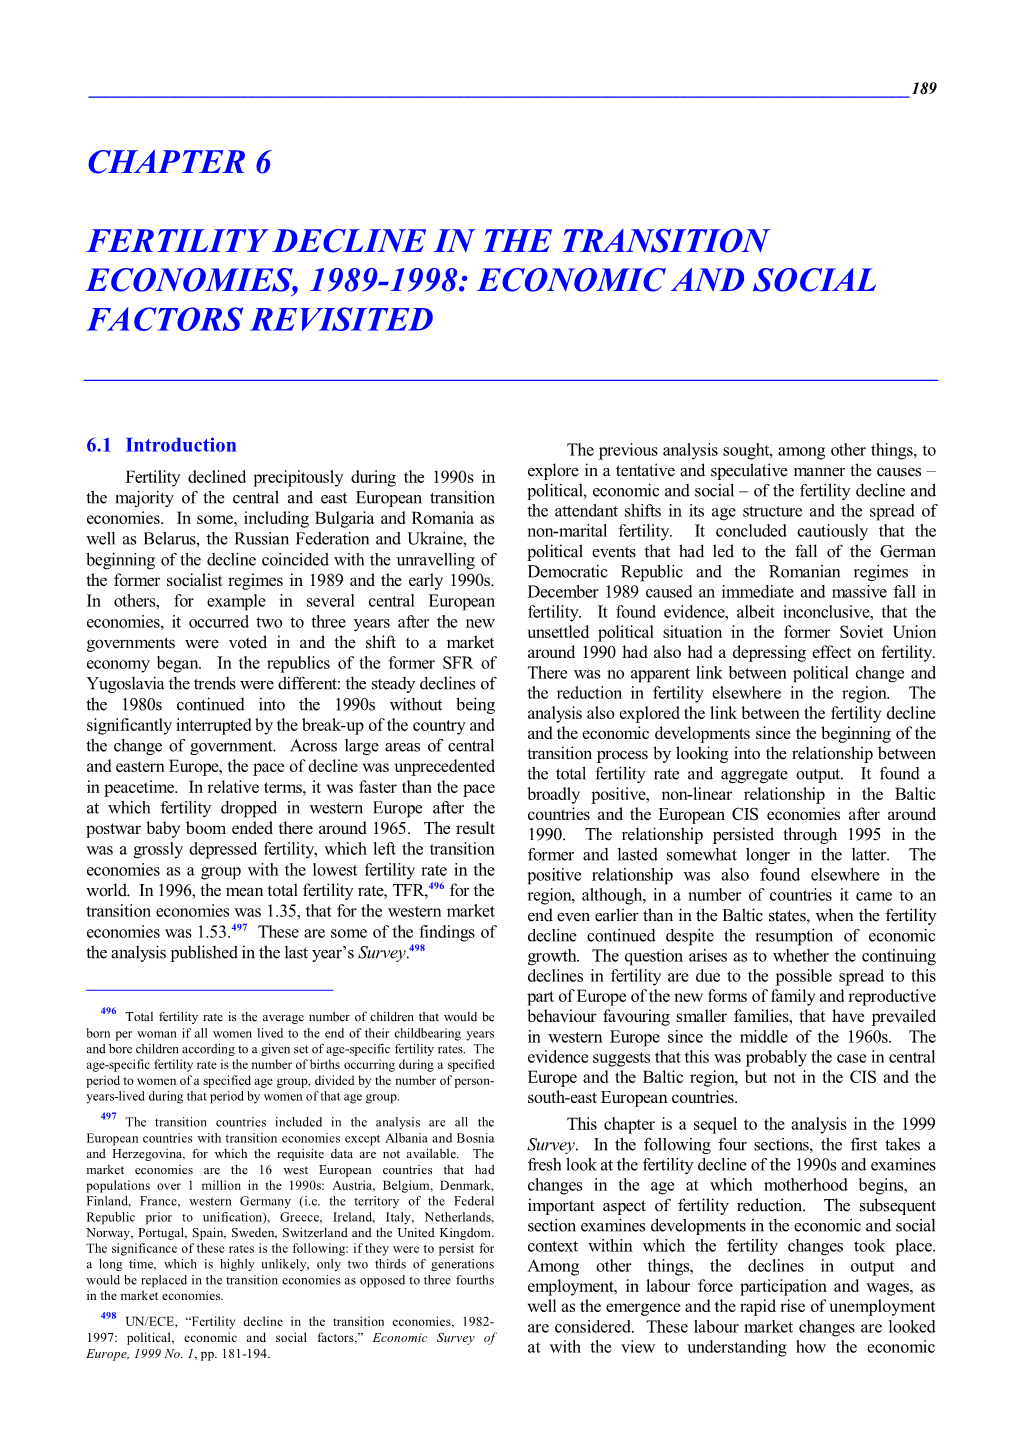 Chapter 6 Fertility Decline in the Transition